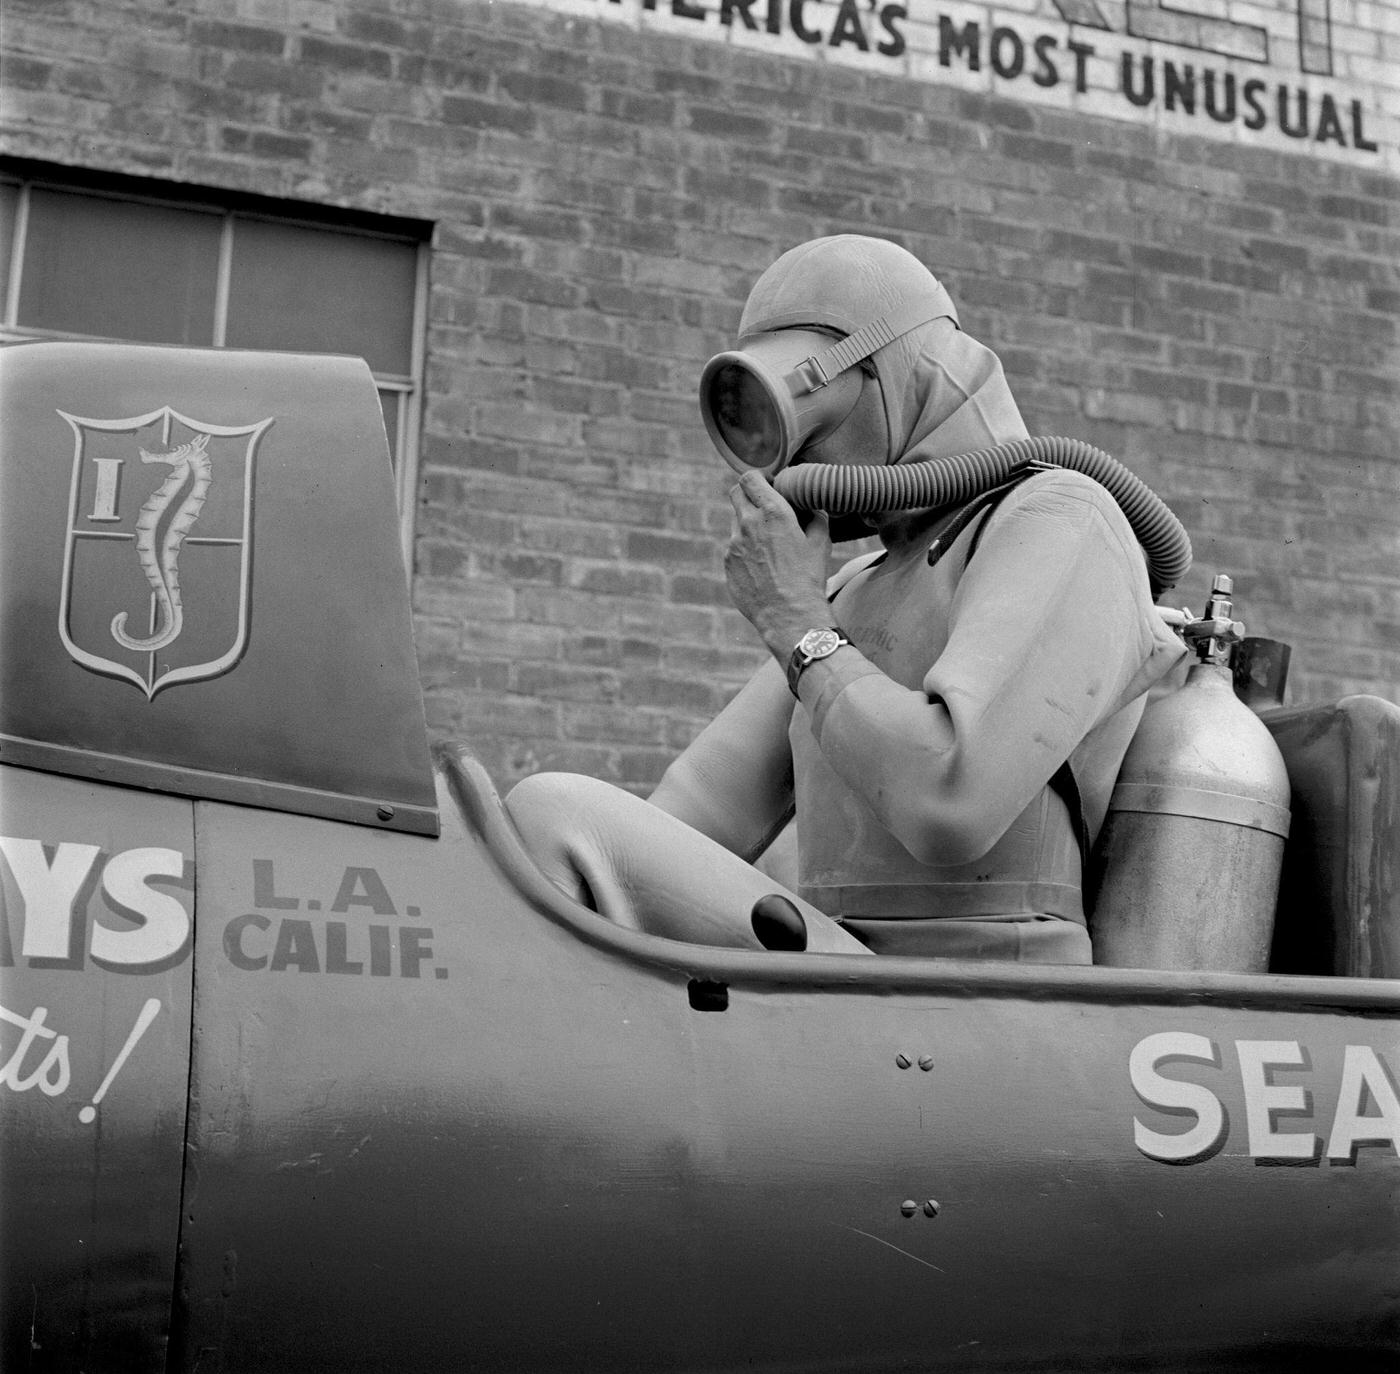 Two-Man Submarine named Sea Horse I with scuba diver on trailer outside of Healthways, America's Most Unusual Sporting Products.